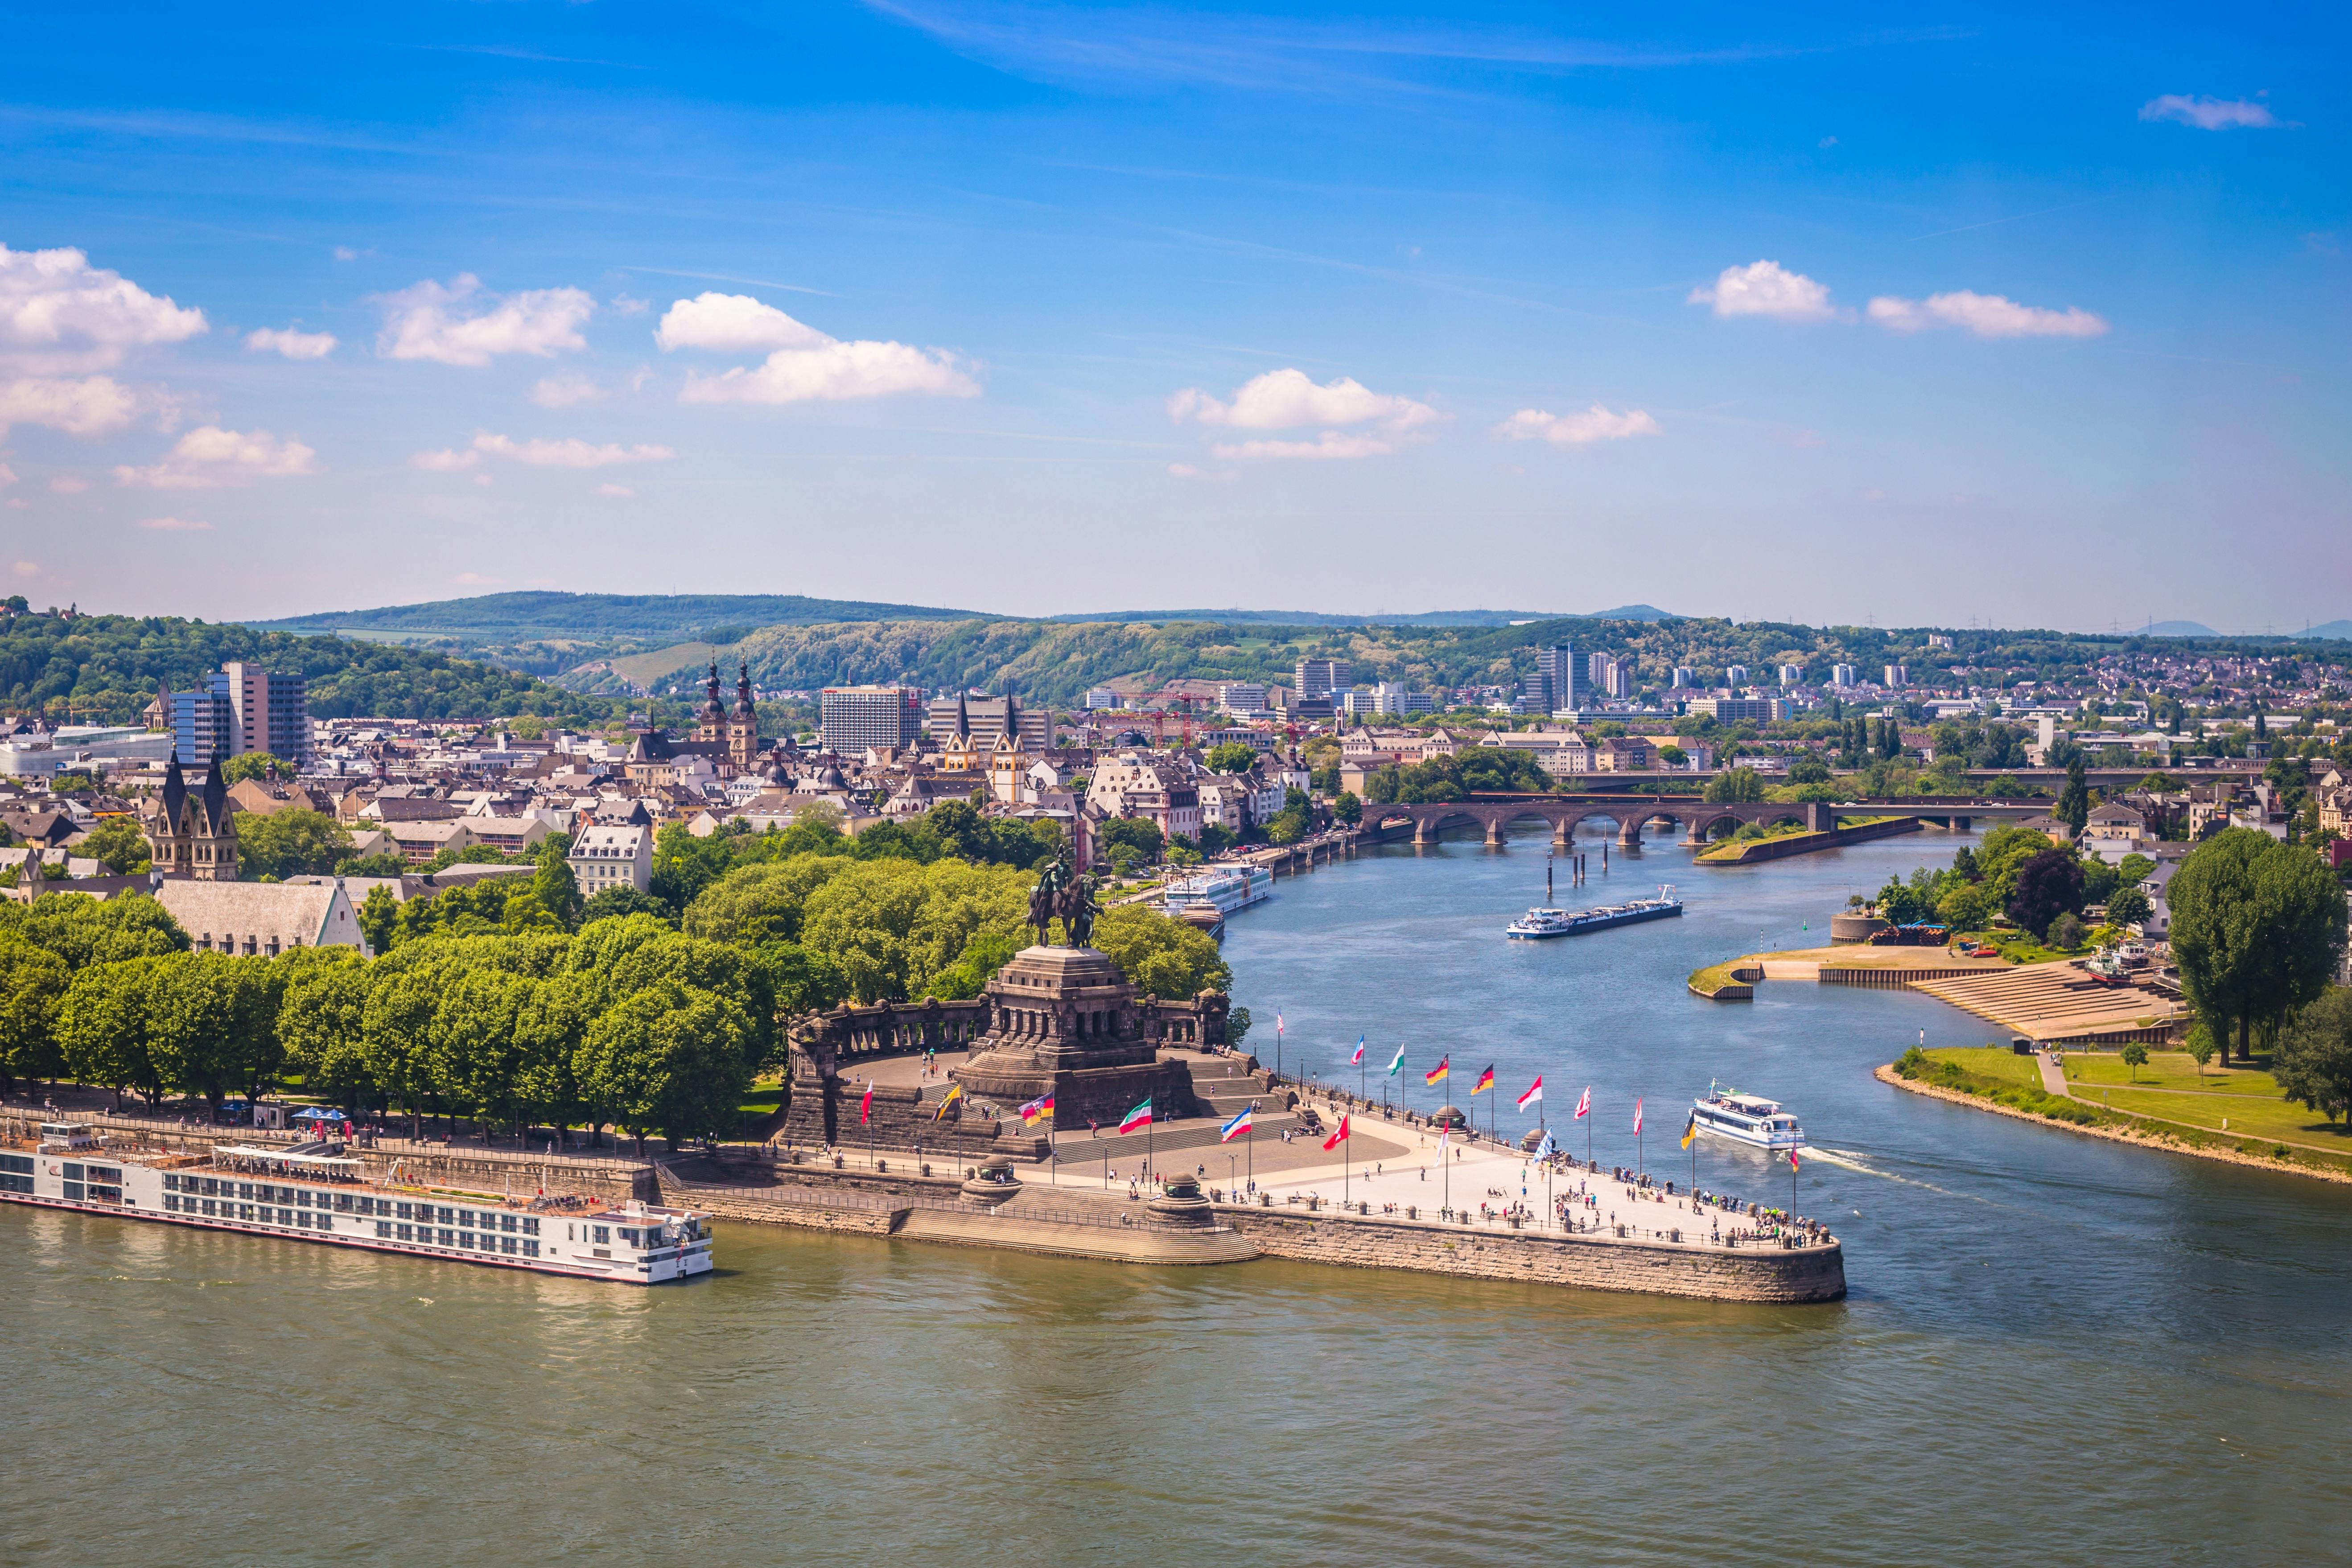 Self guided tour with interactive city game of Koblenz Musement